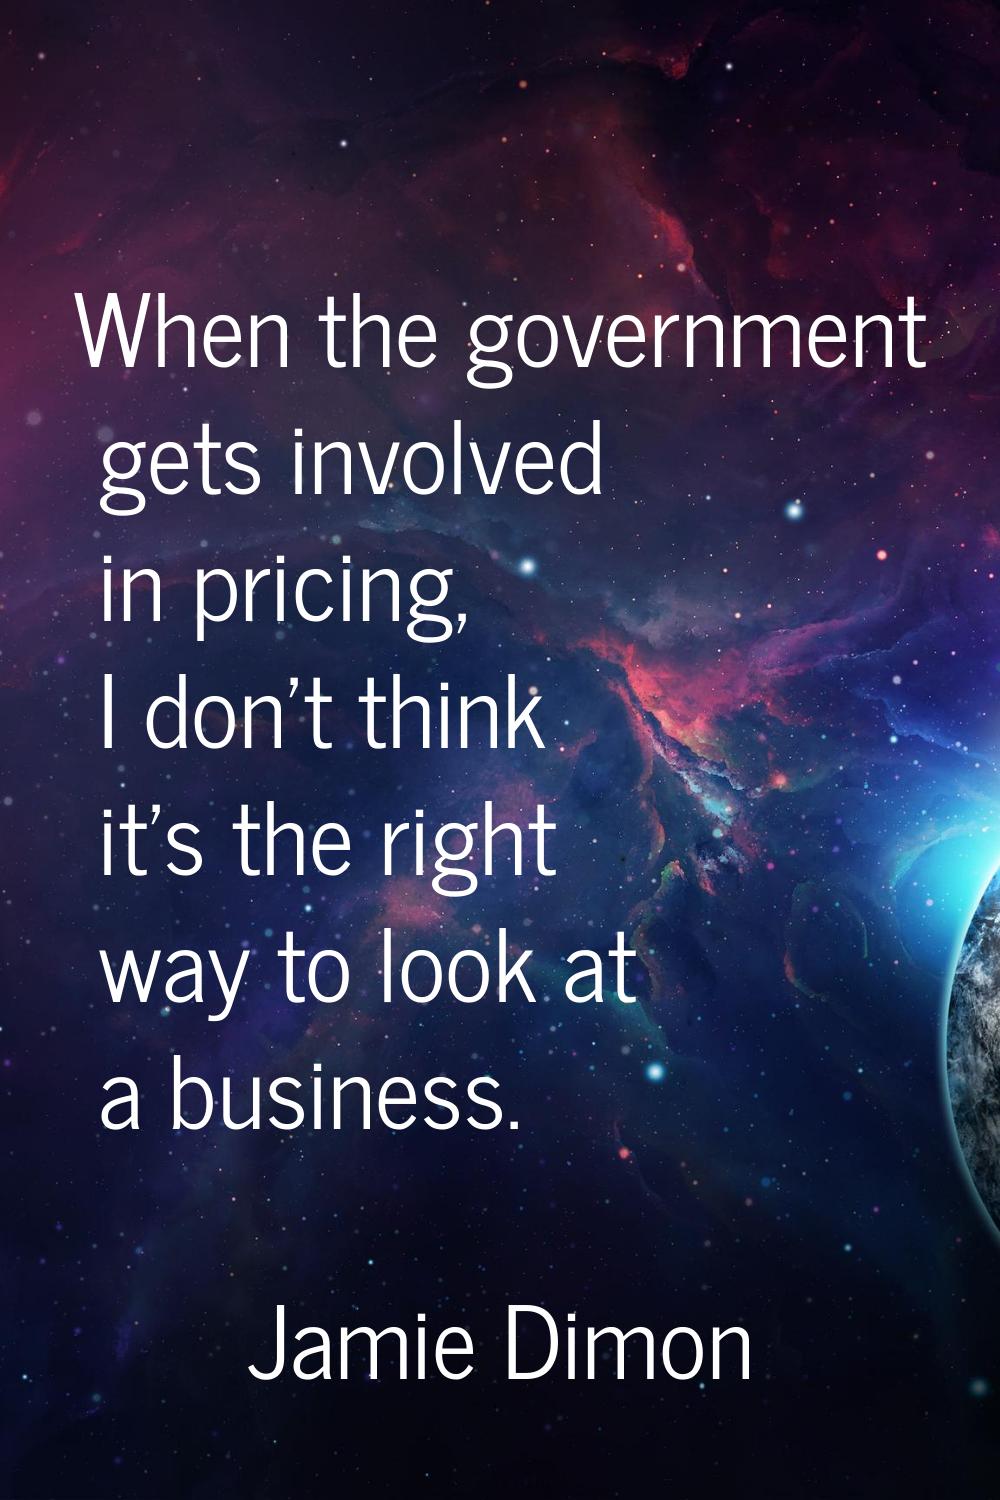 When the government gets involved in pricing, I don't think it's the right way to look at a busines